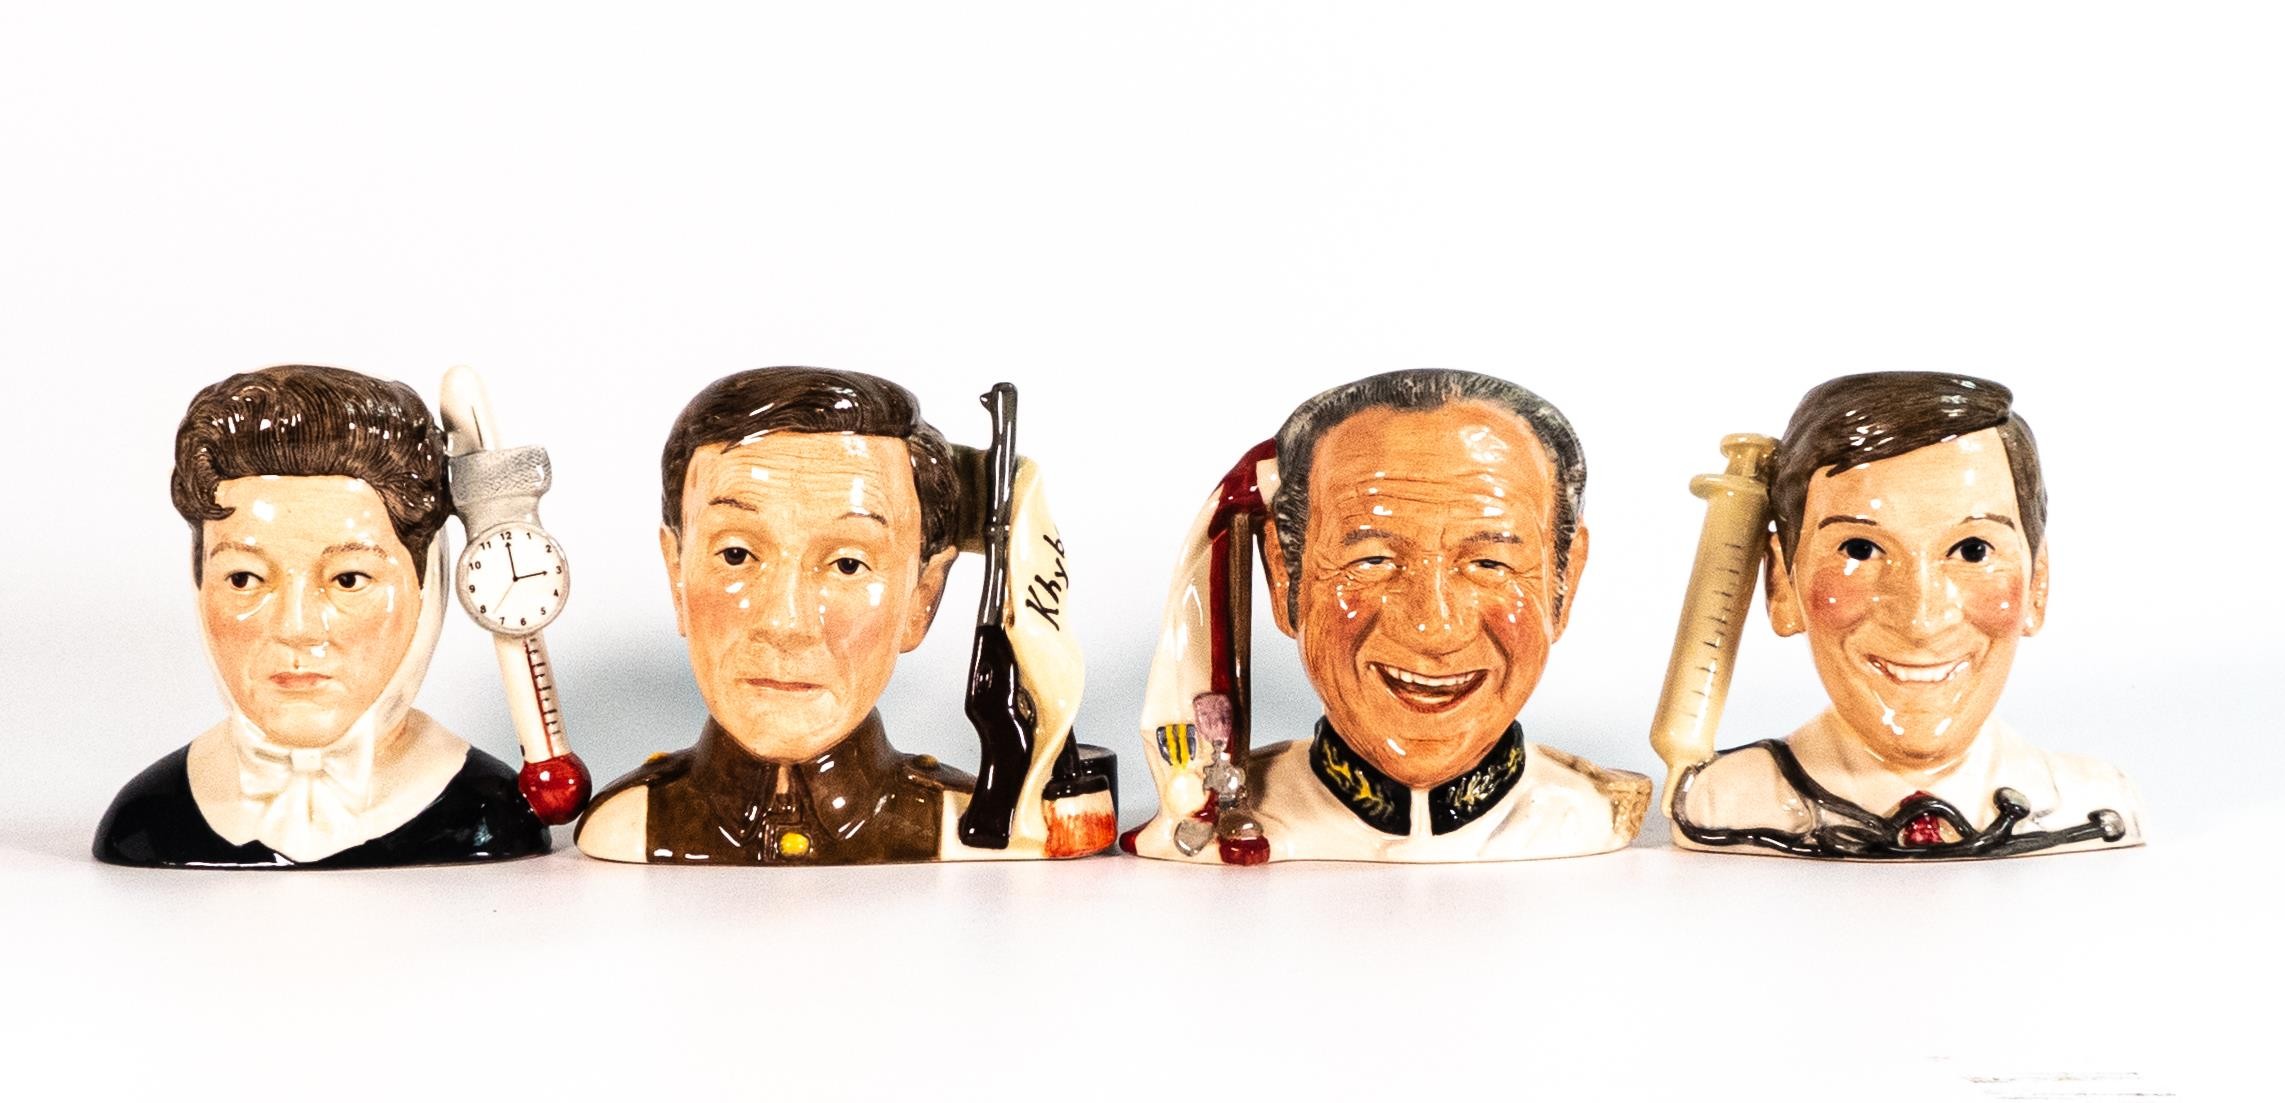 A Royal Doulton set of four character jugs from the Carry On films, Sid James D7162, Charles Hawtrey